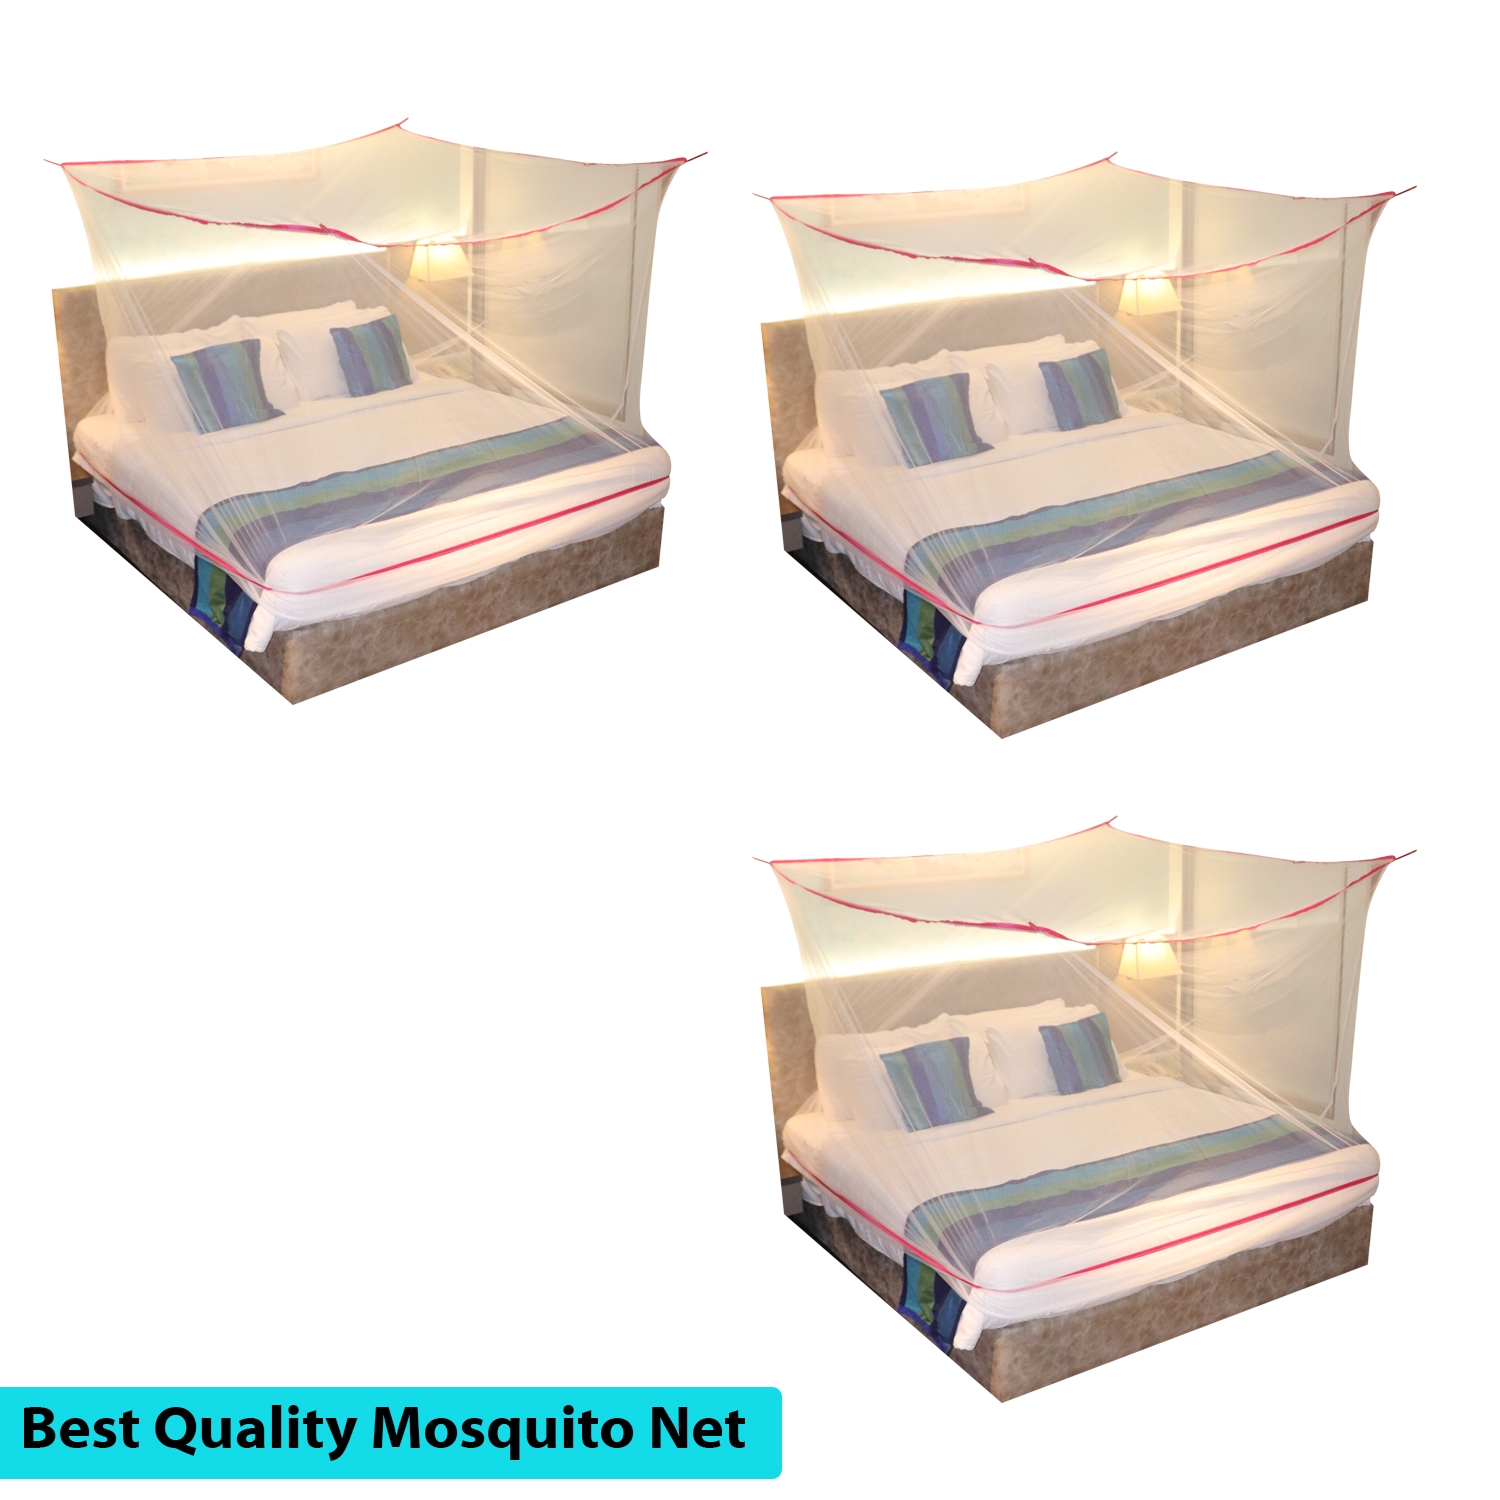 SILVER SHINE | Mosquito Net for Double Bed, King-Size, Square Hanging Foldable Polyester Net White And PinkPack of 3